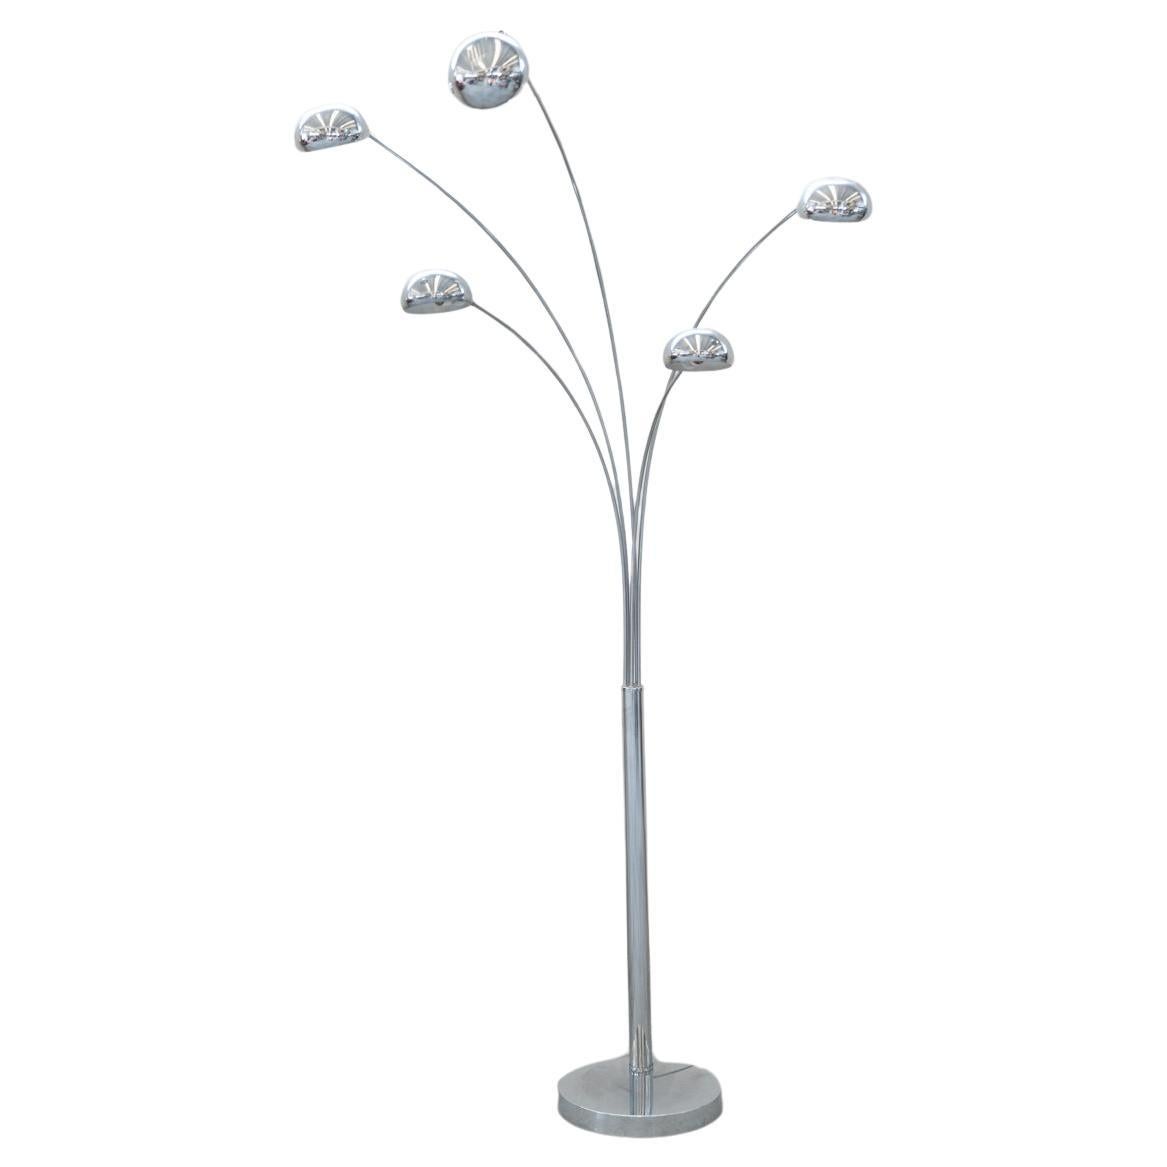 Floor lamp 5 arms Dominioni 1970 For Sale